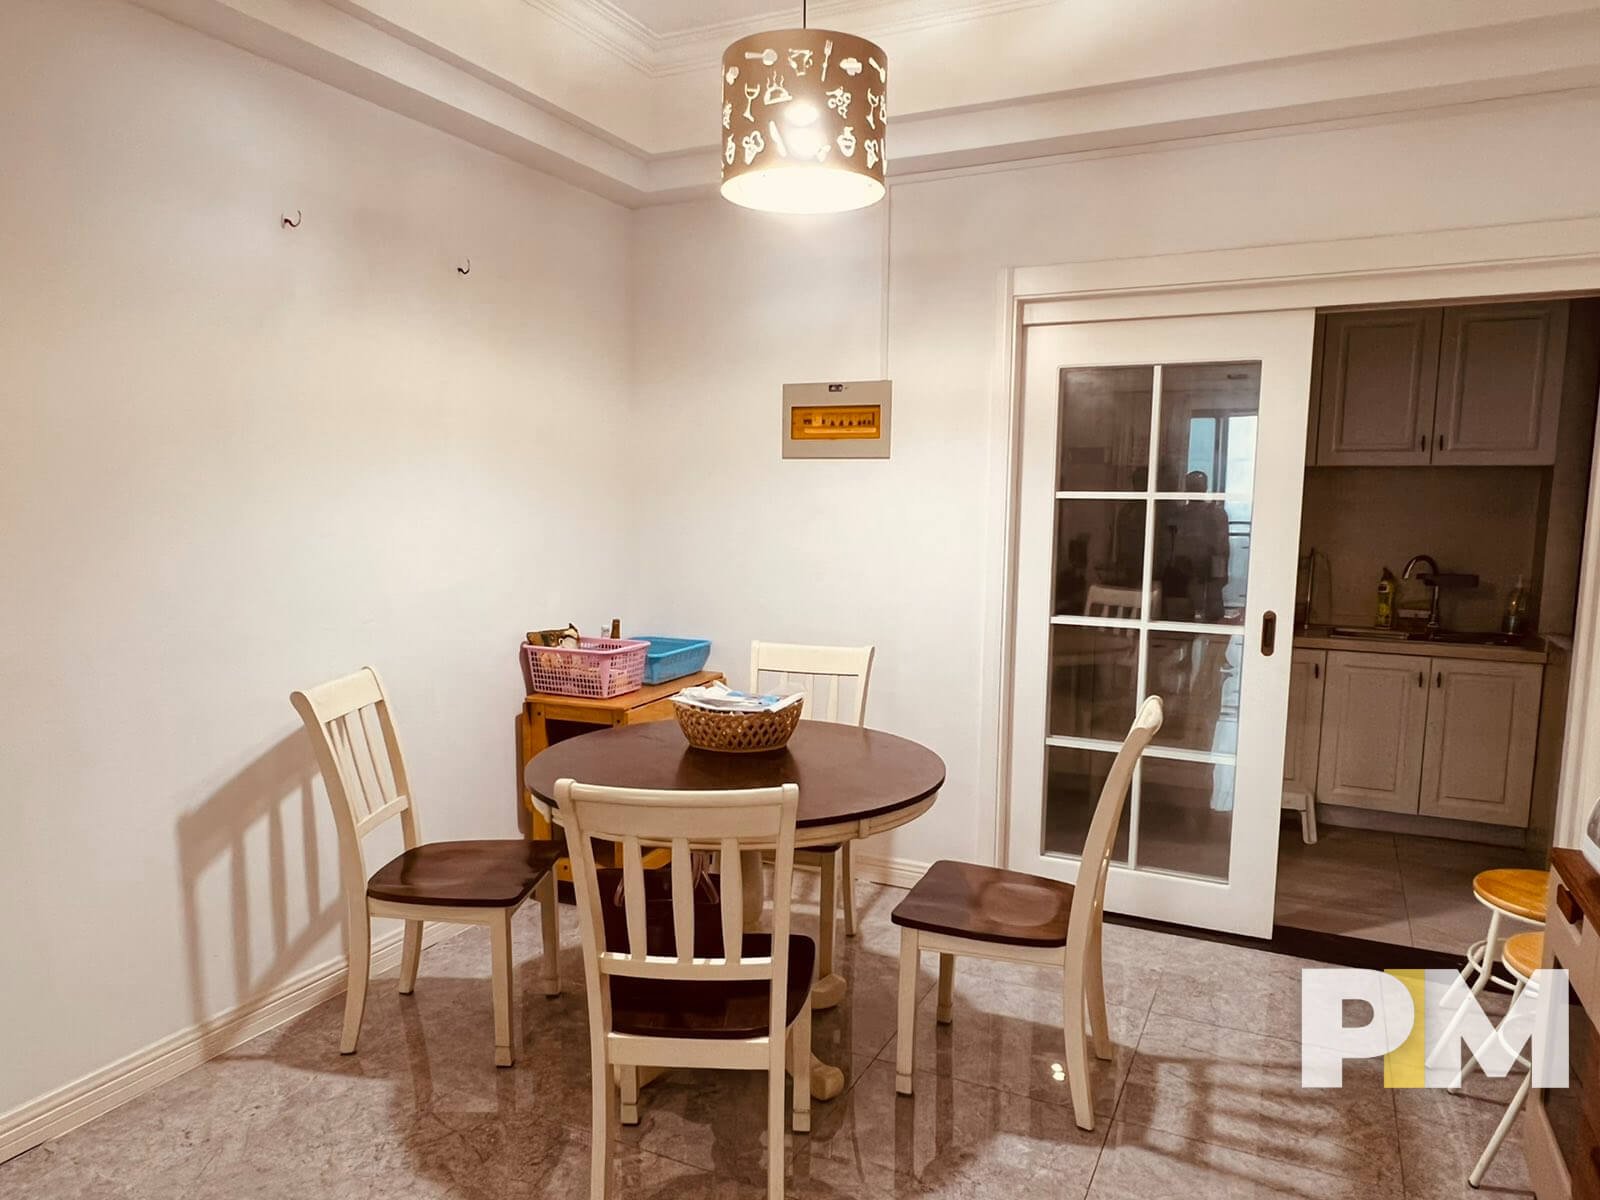 Dining table and chairs - Myanmar Real Estate